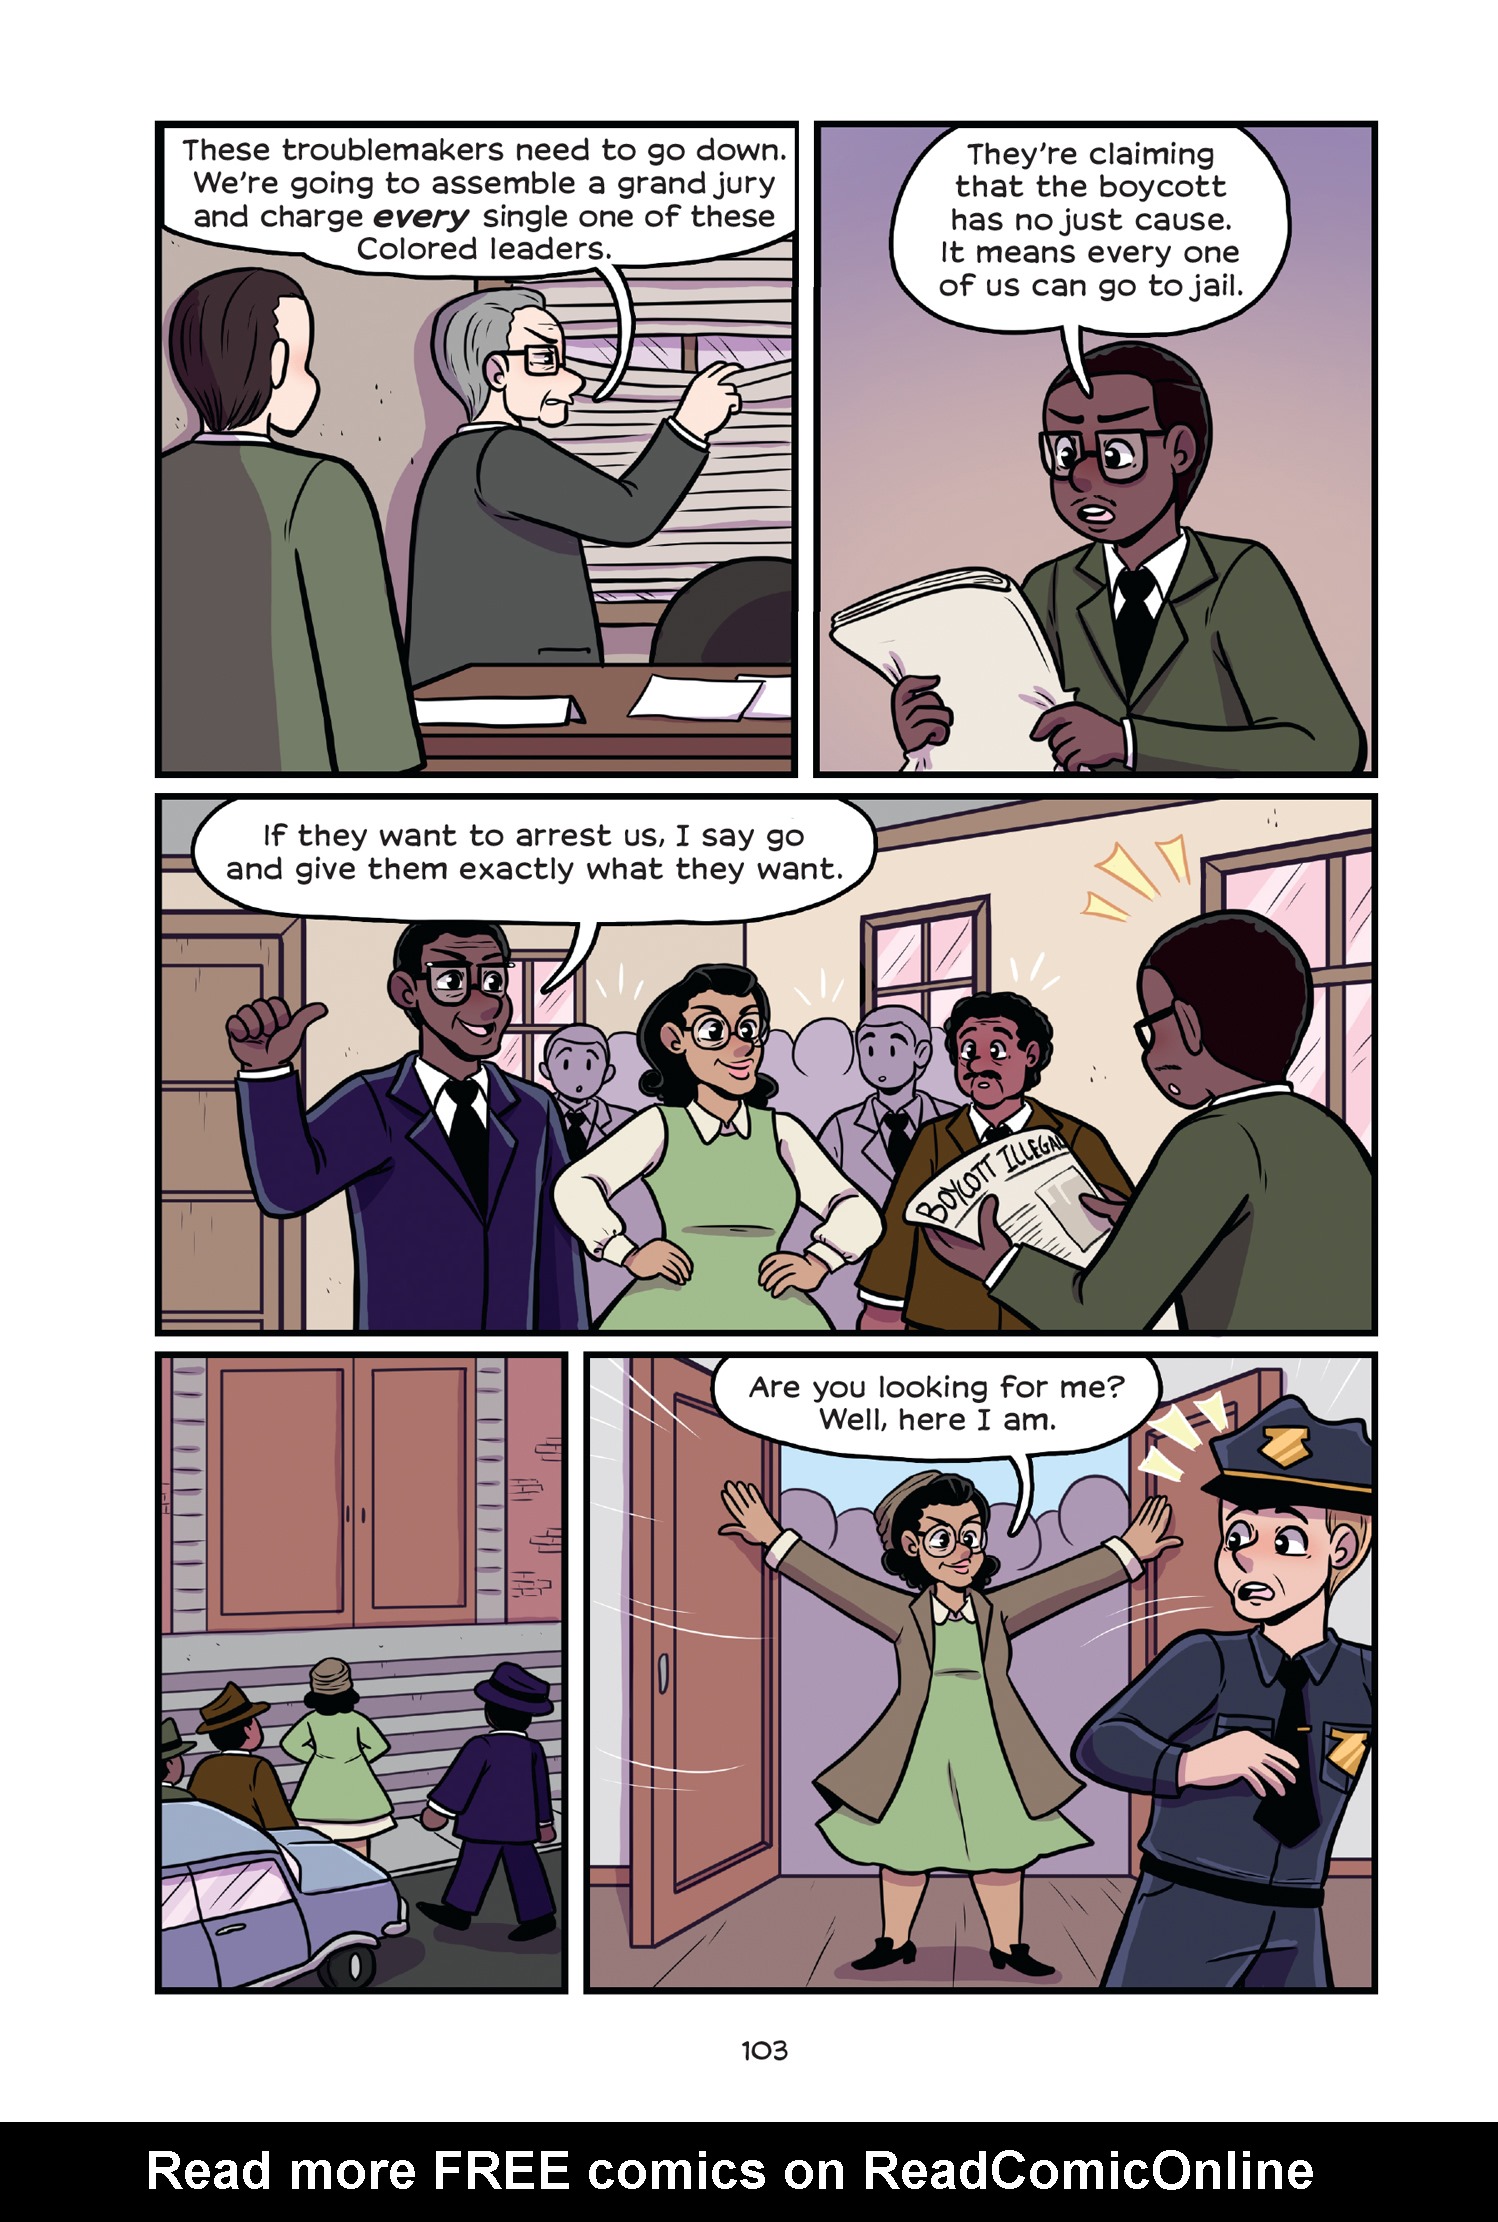 Read online History Comics comic -  Issue # Rosa Parks & Claudette Colvin - Civil Rights Heroes - 108